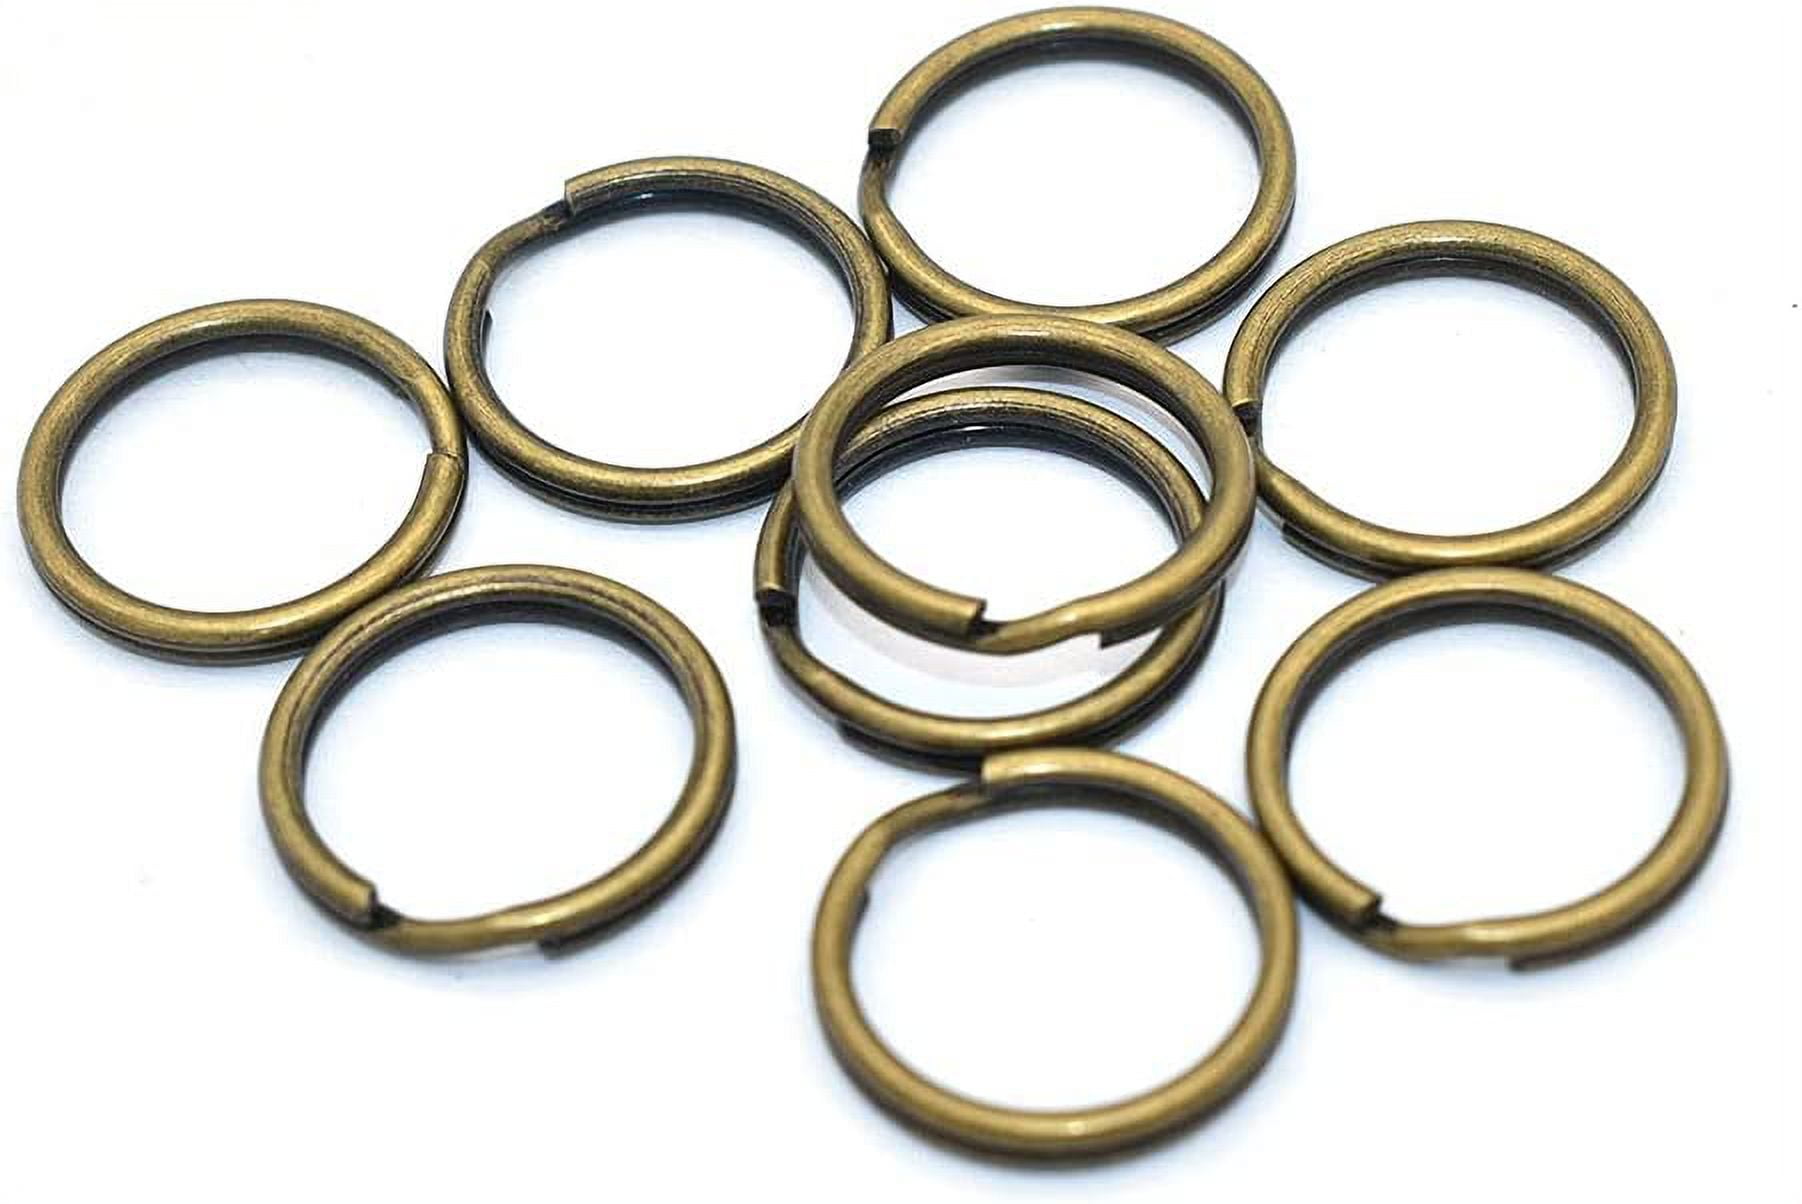 Bluemoon 10 Pcs - 50mm 2 Metal O-Rings Rings Non Welded